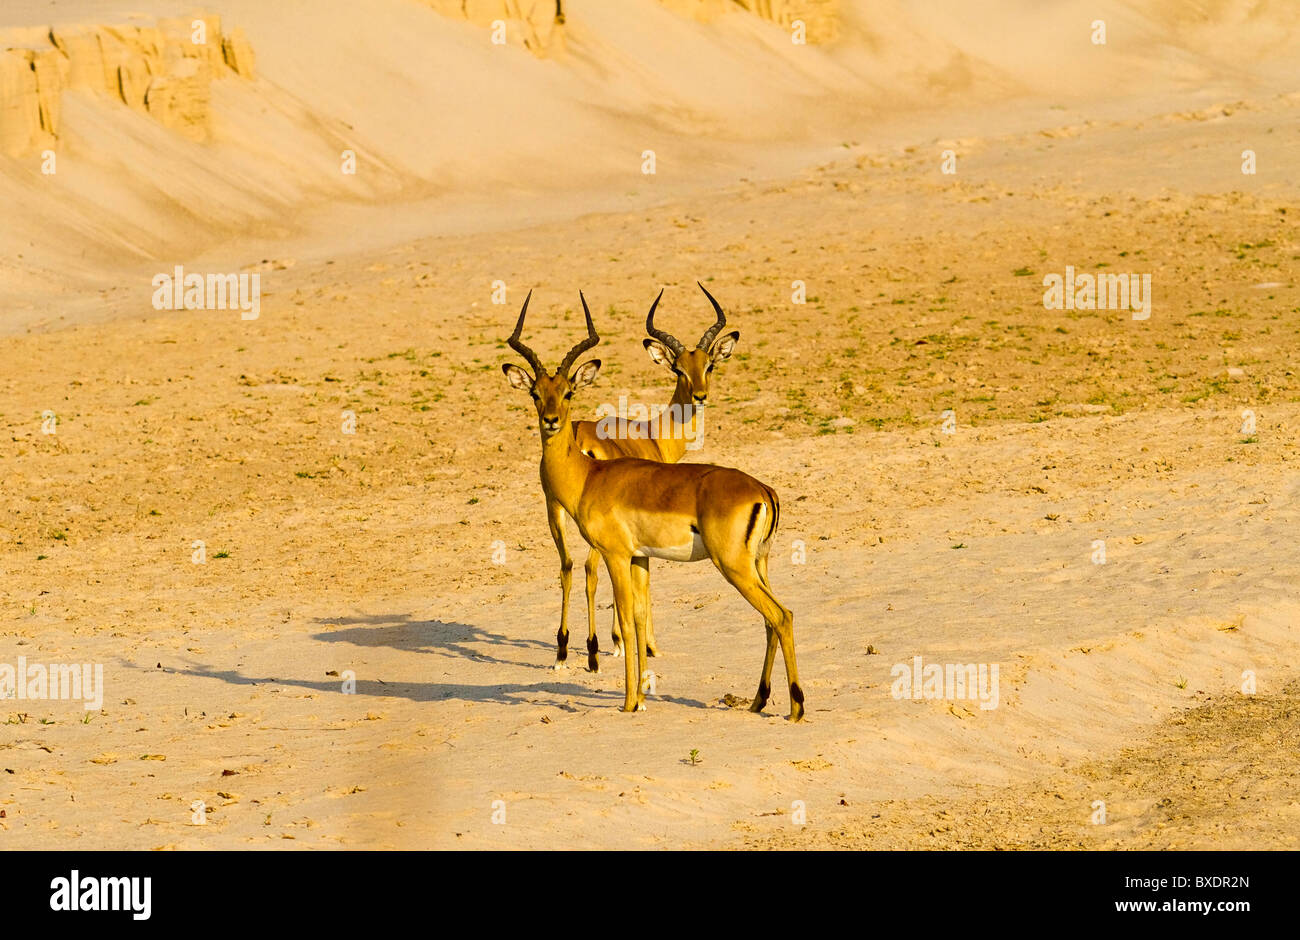 Two impala (deer like animals) in a dried riverbed in south Luangwa National Park, Zambia. Stock Photo